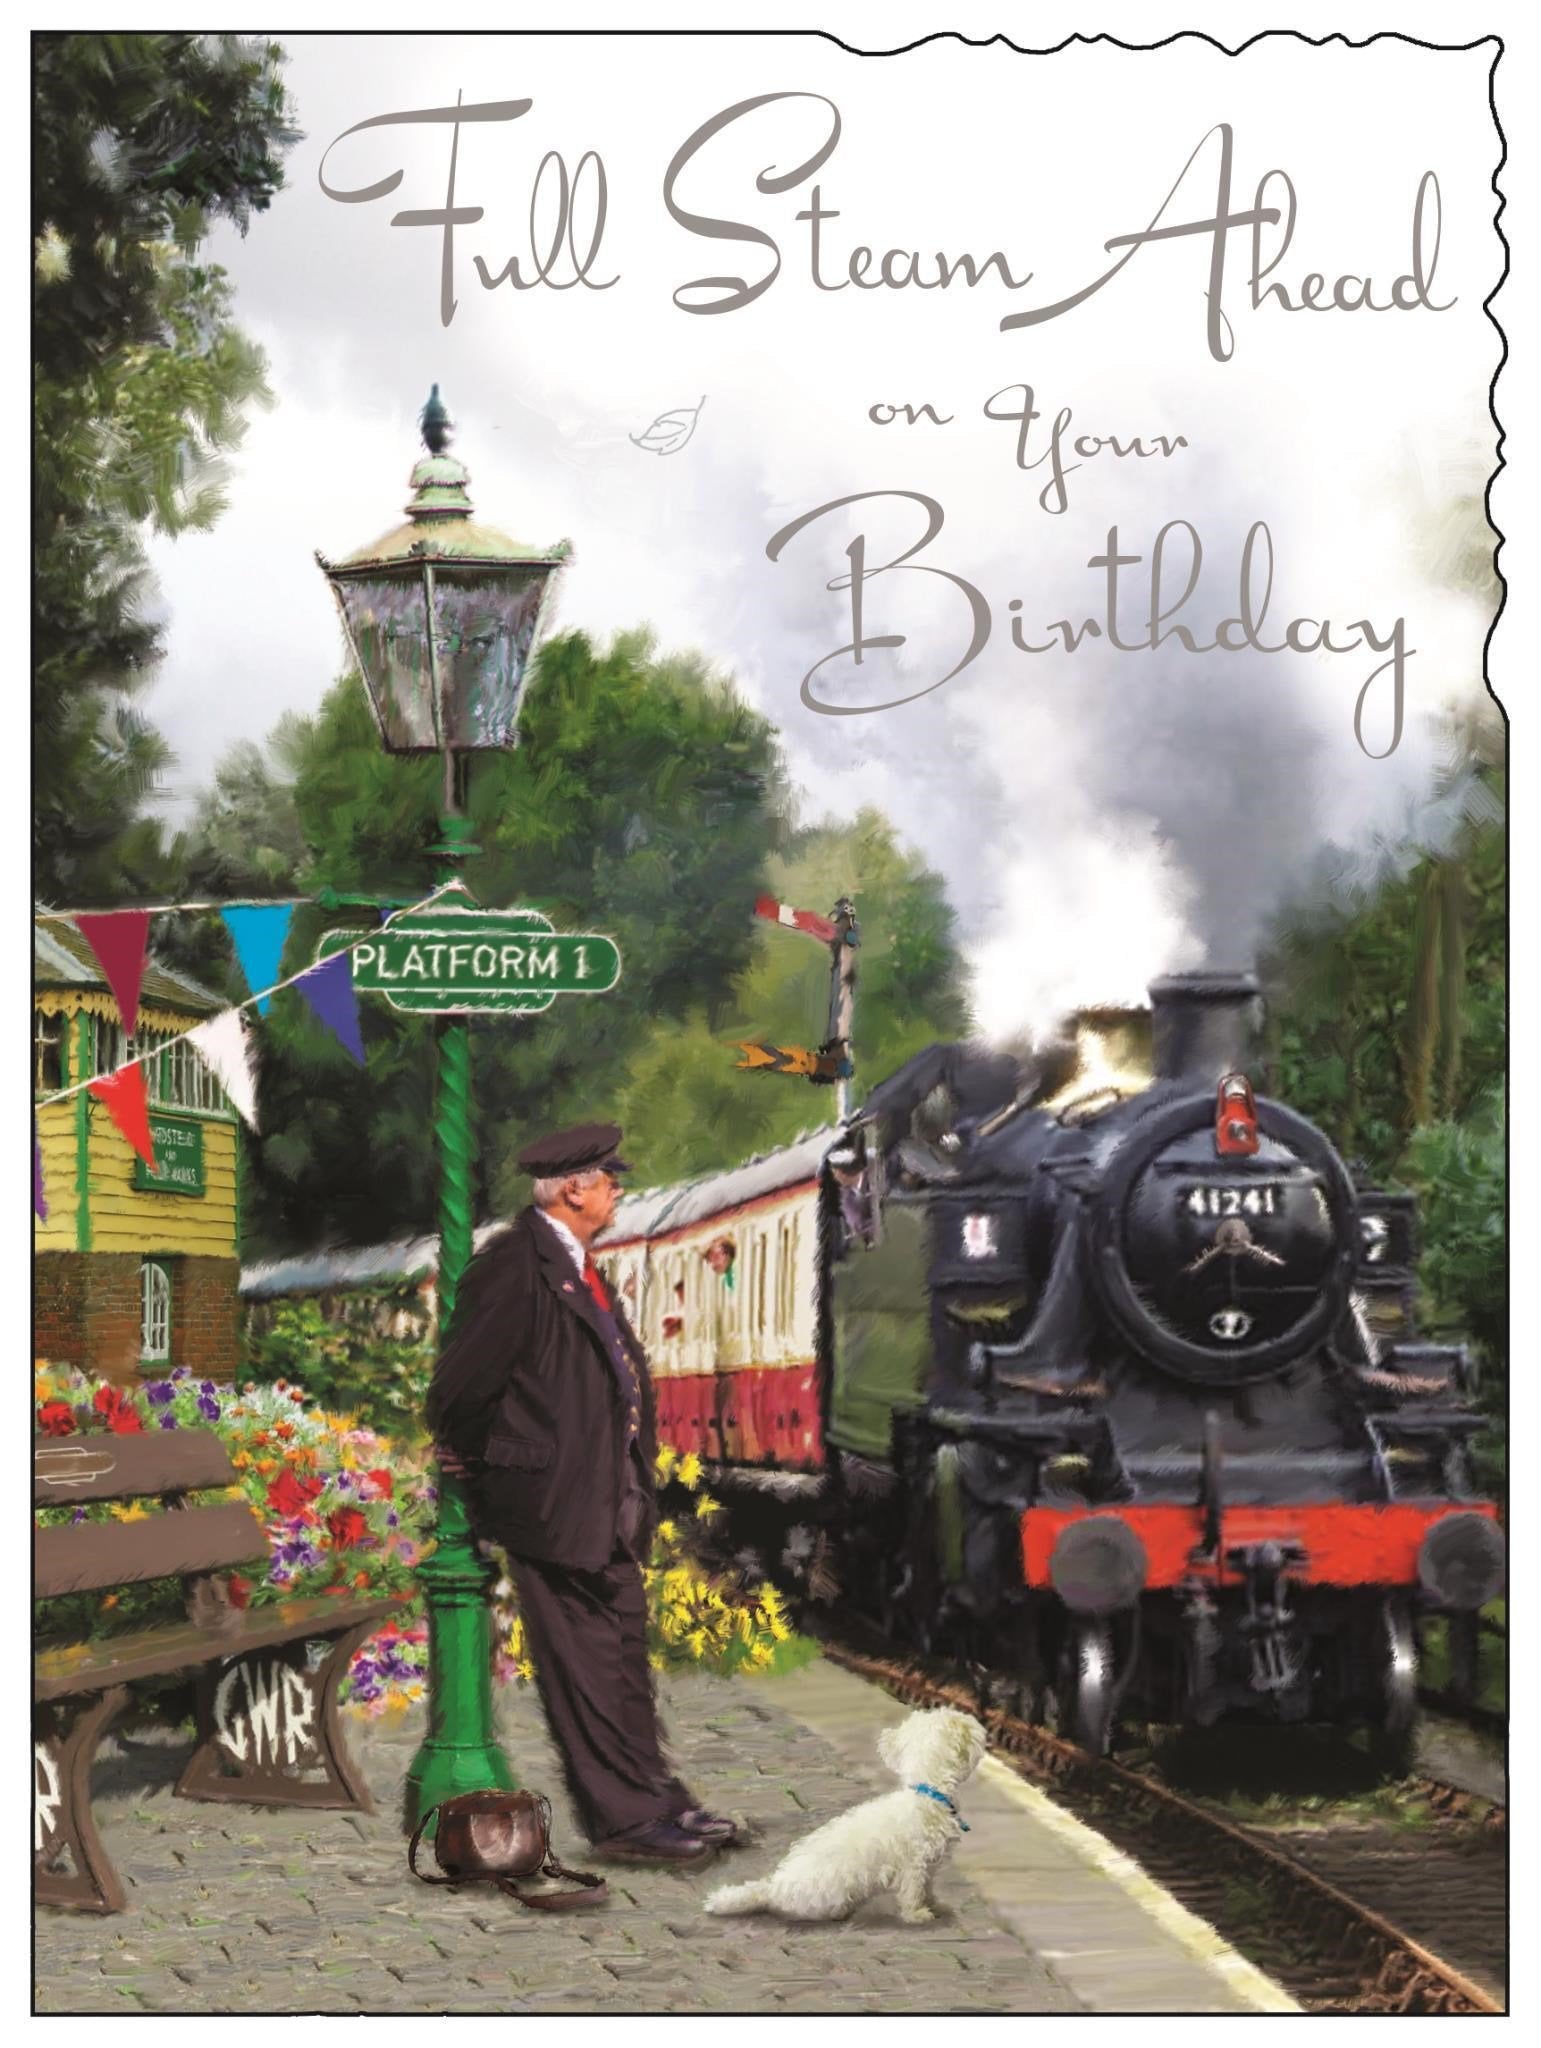 Front of Open Male Birthday Steam Train Greetings Card